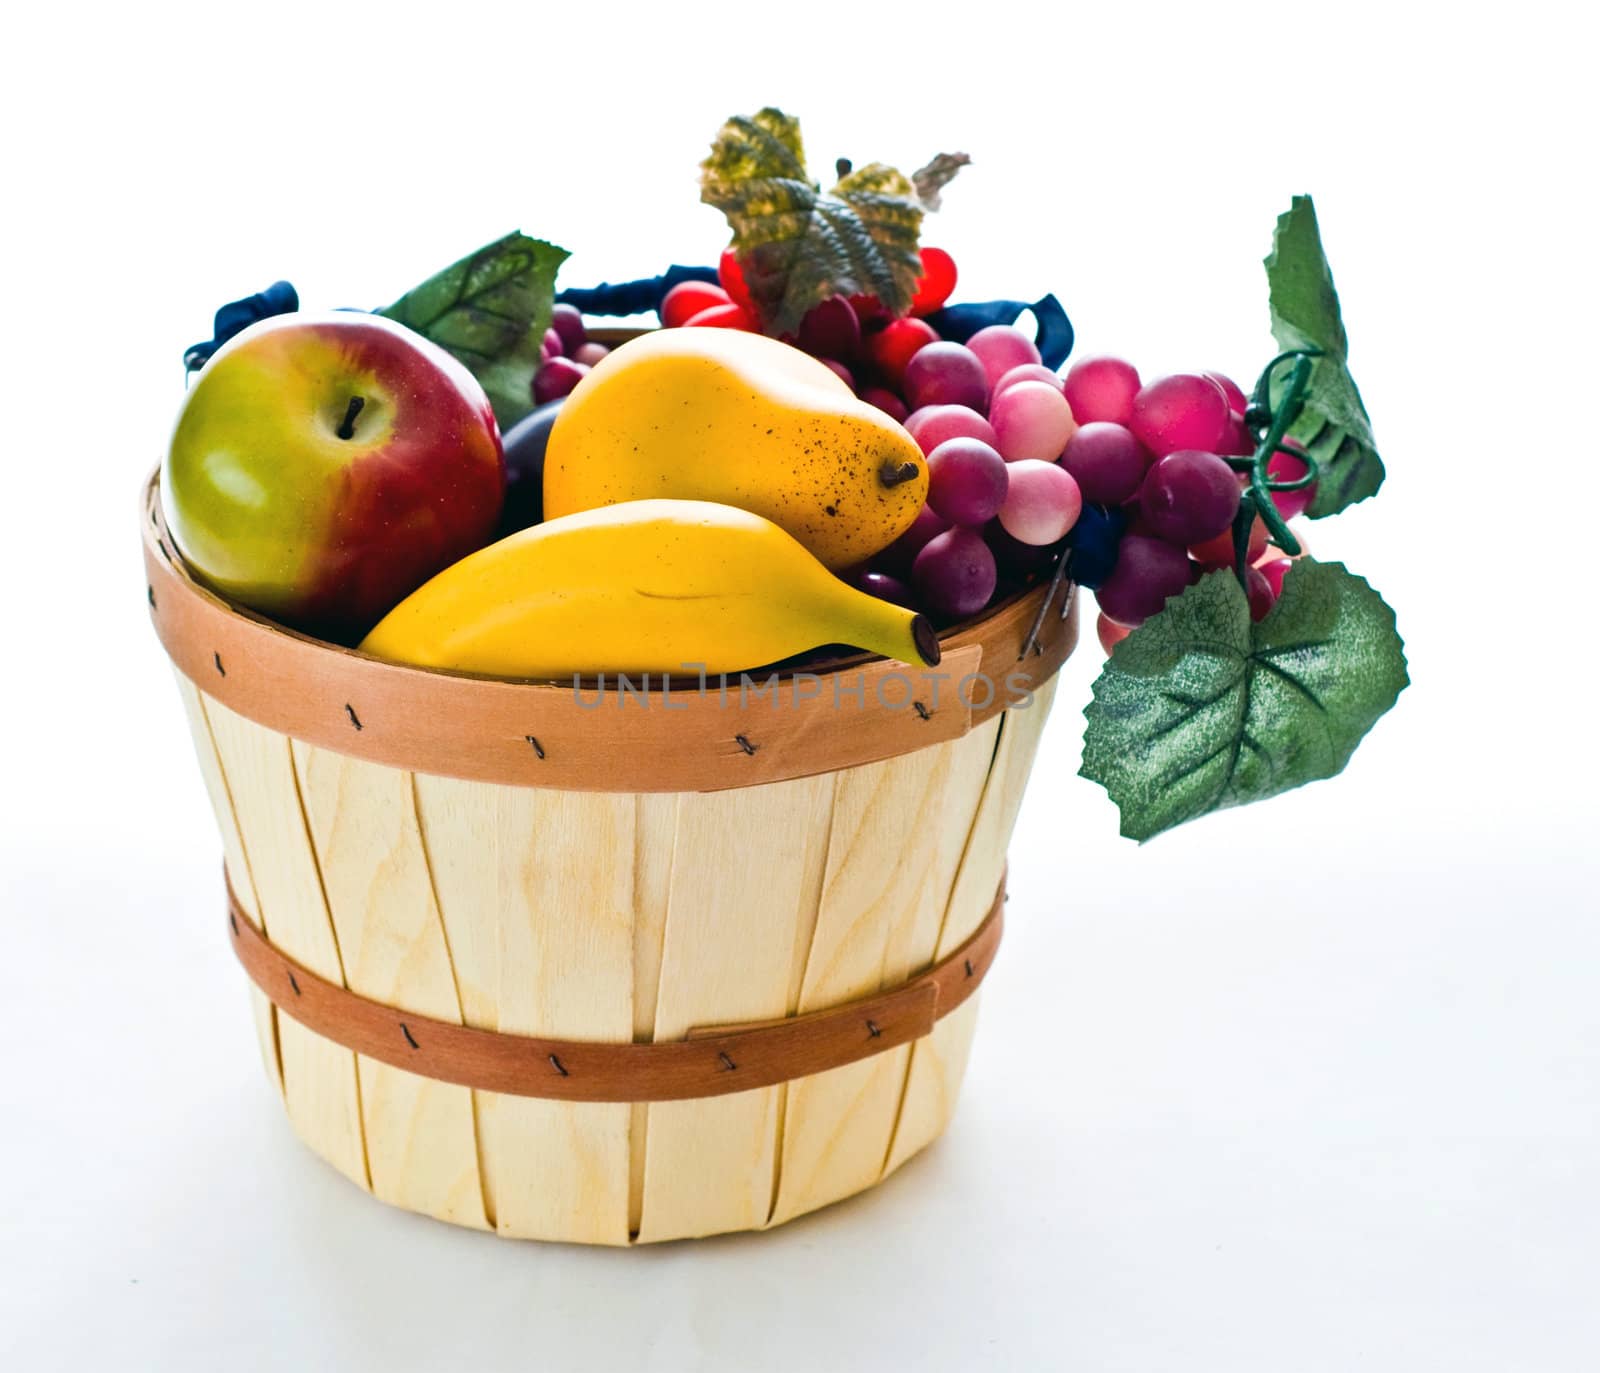 Various types of fruit in a wooden basket as a still life.